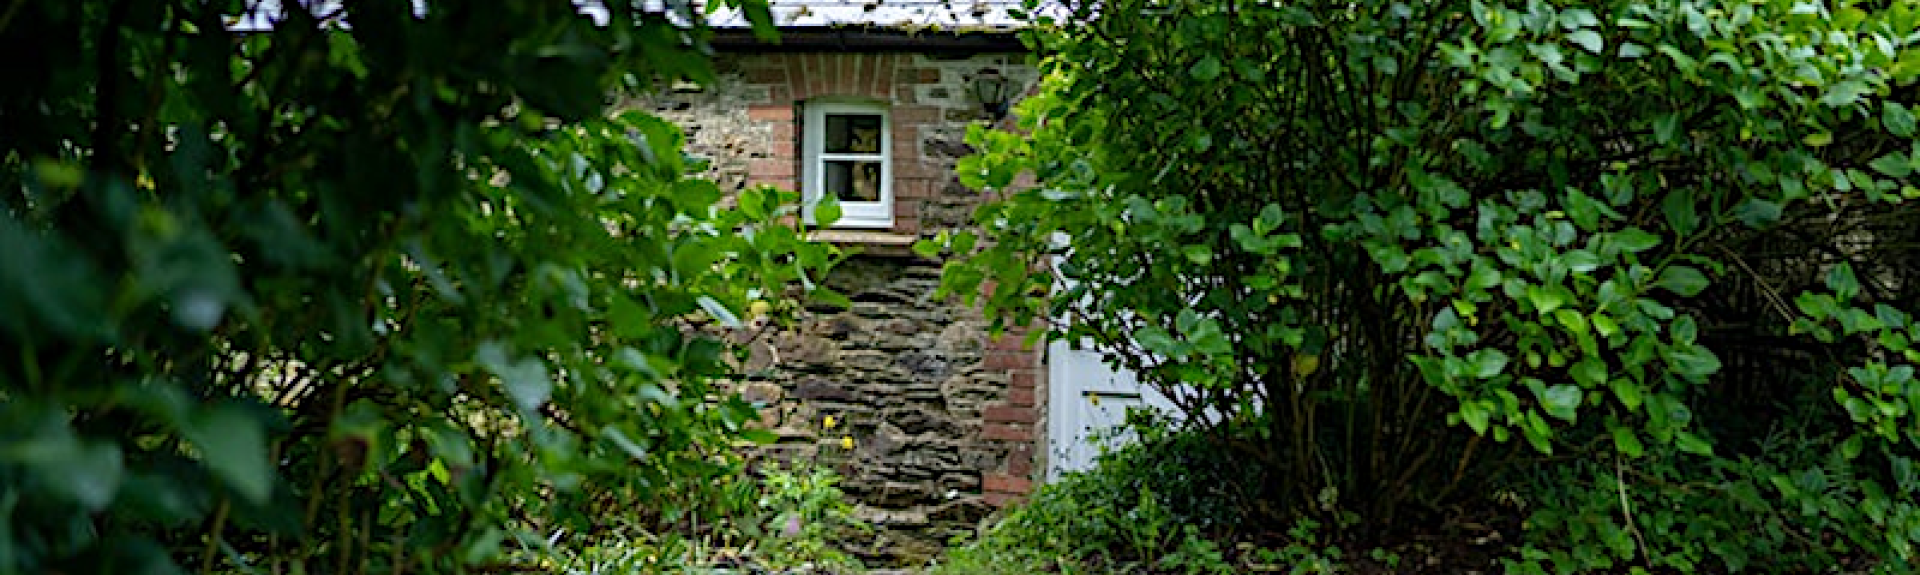 A glimpse of a stone-built barn conversion partially screened by mature bushes in a garden.